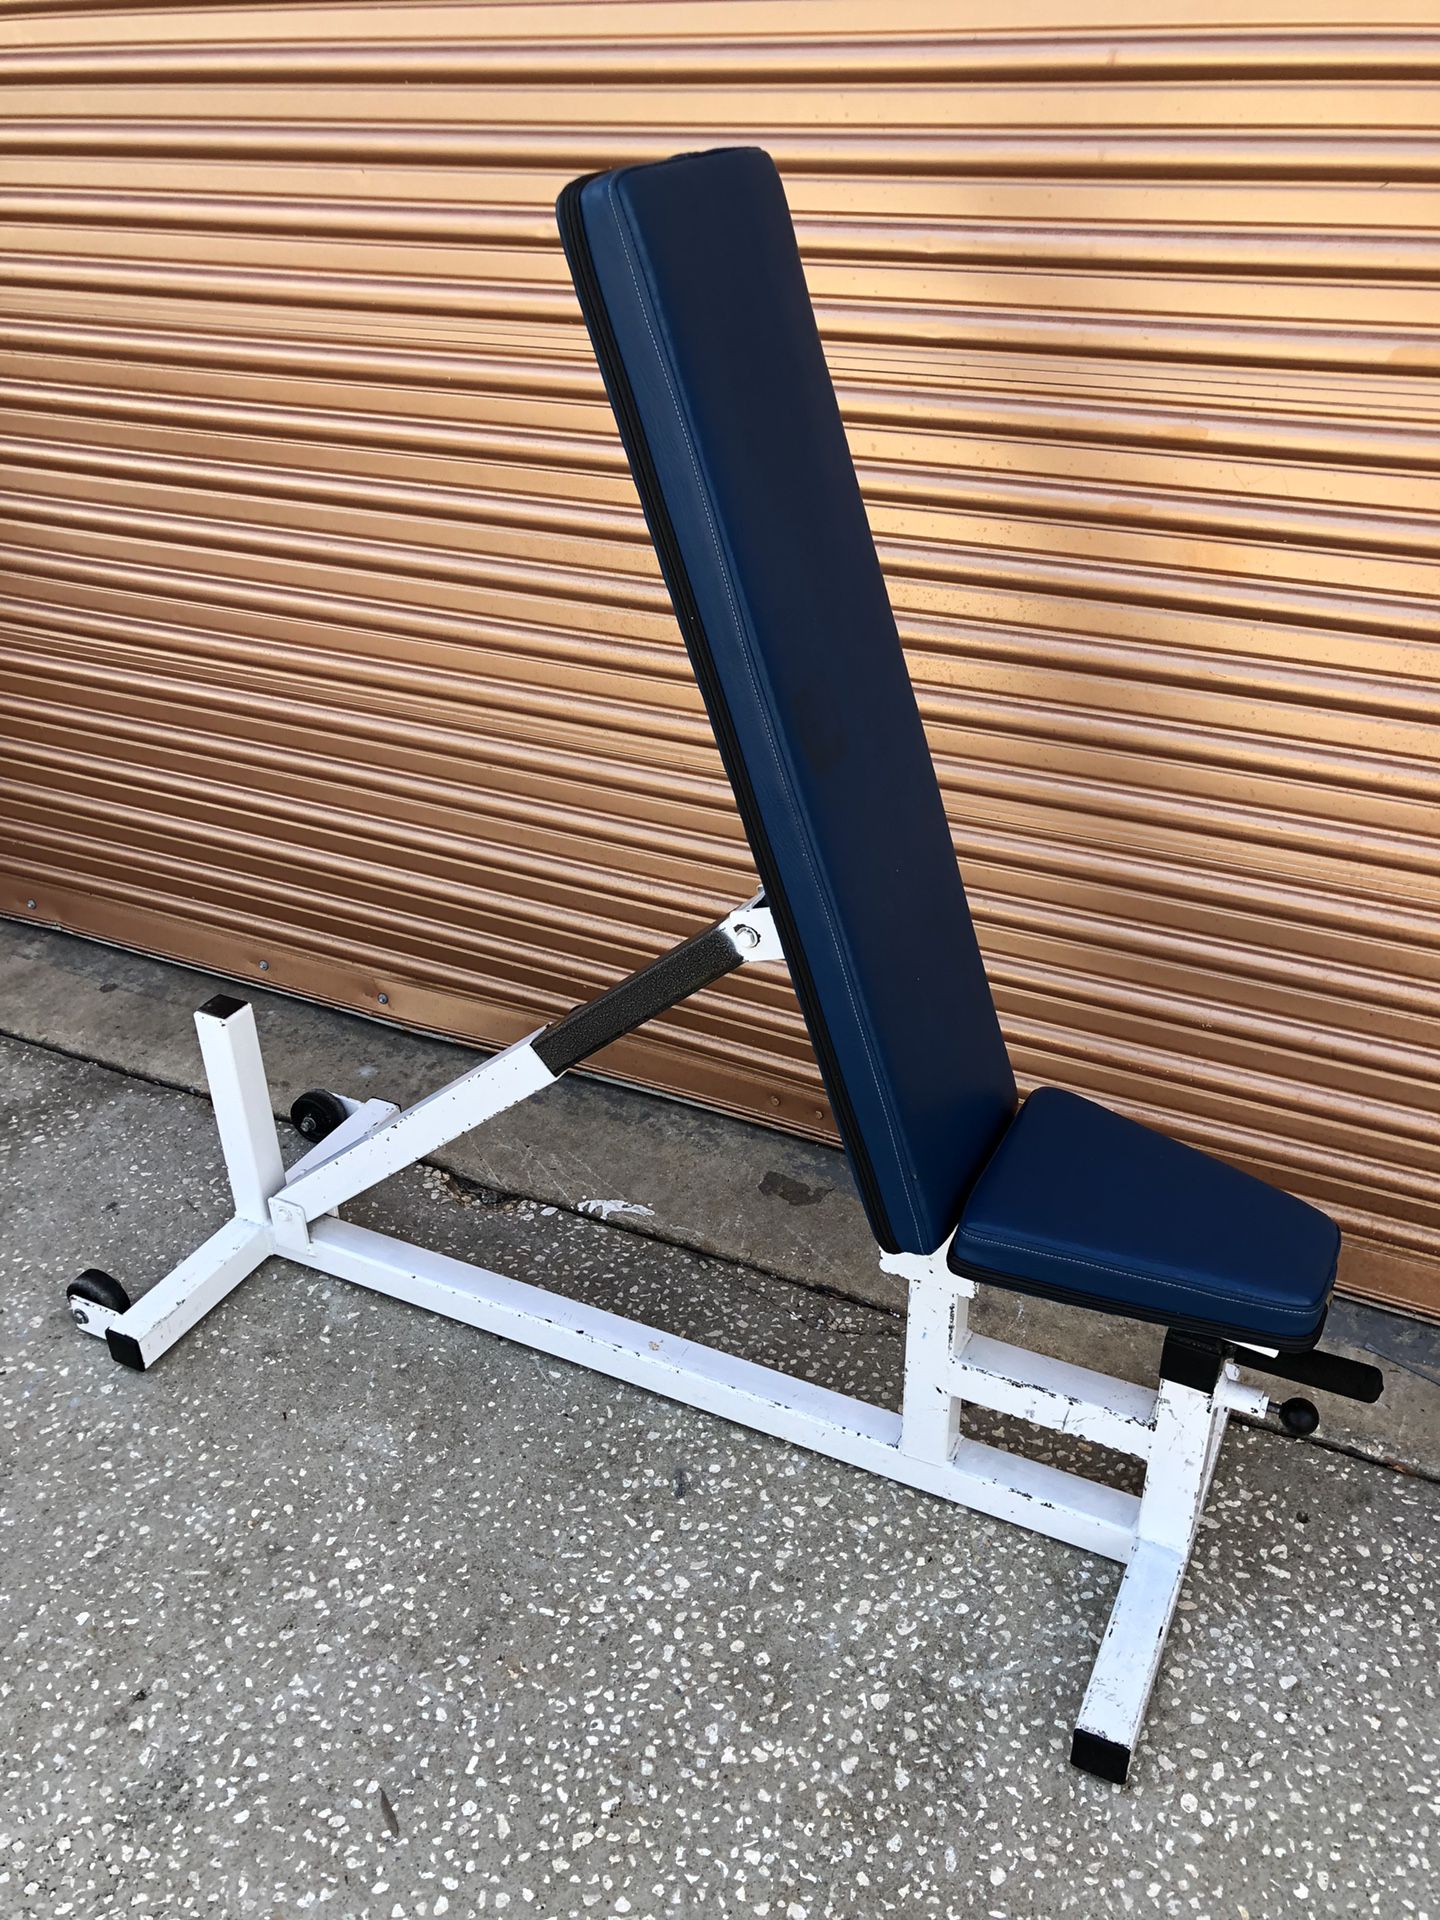 Full commercial ProMaxima Adjustable Weight Bench- Flat Incline & Shoulder Press Positions